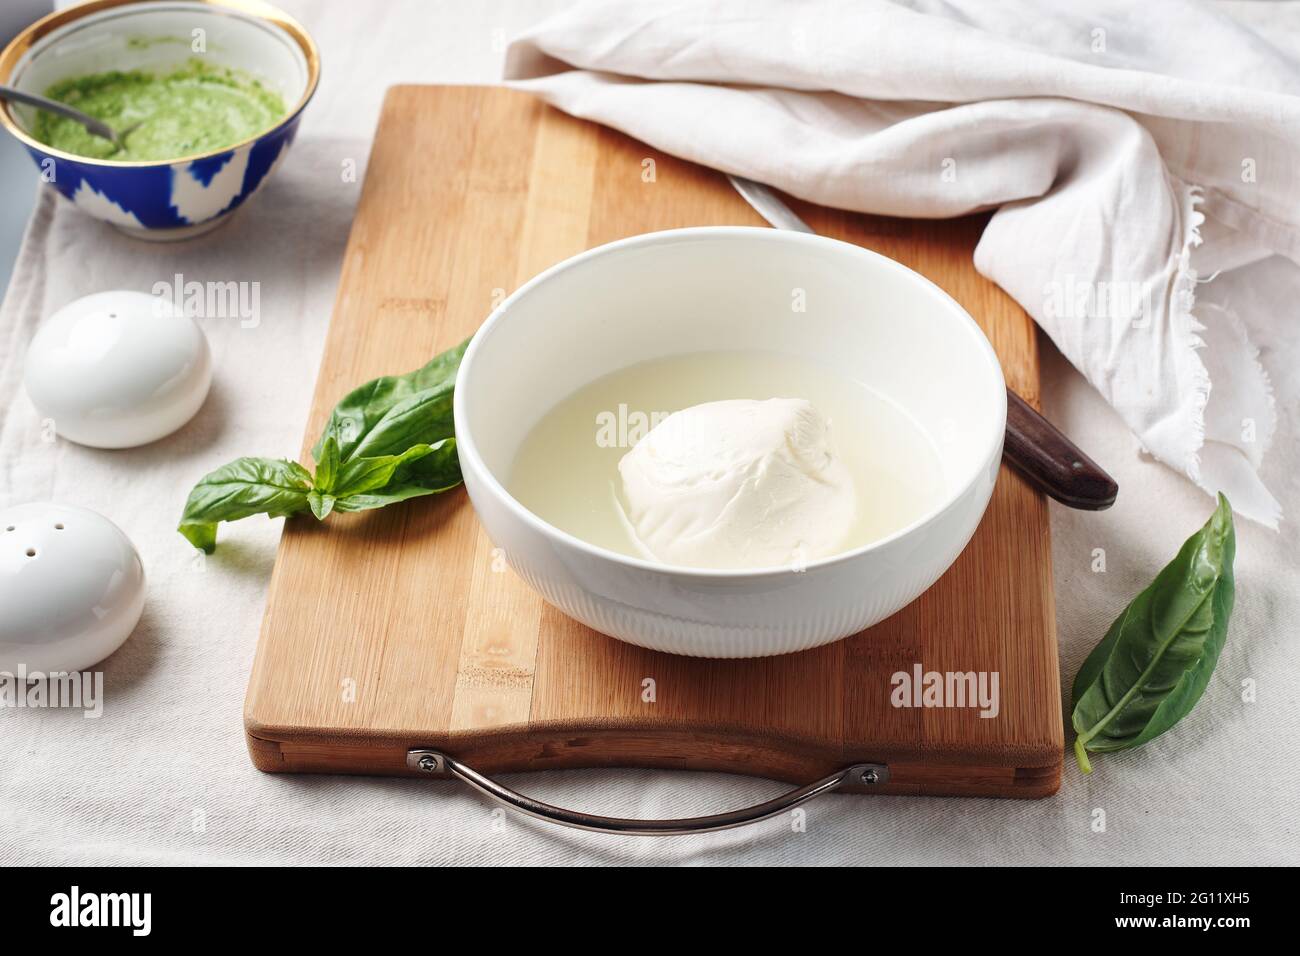 Mozzarella cheese ball in a bowl and fresh basil leaves. Stock Photo